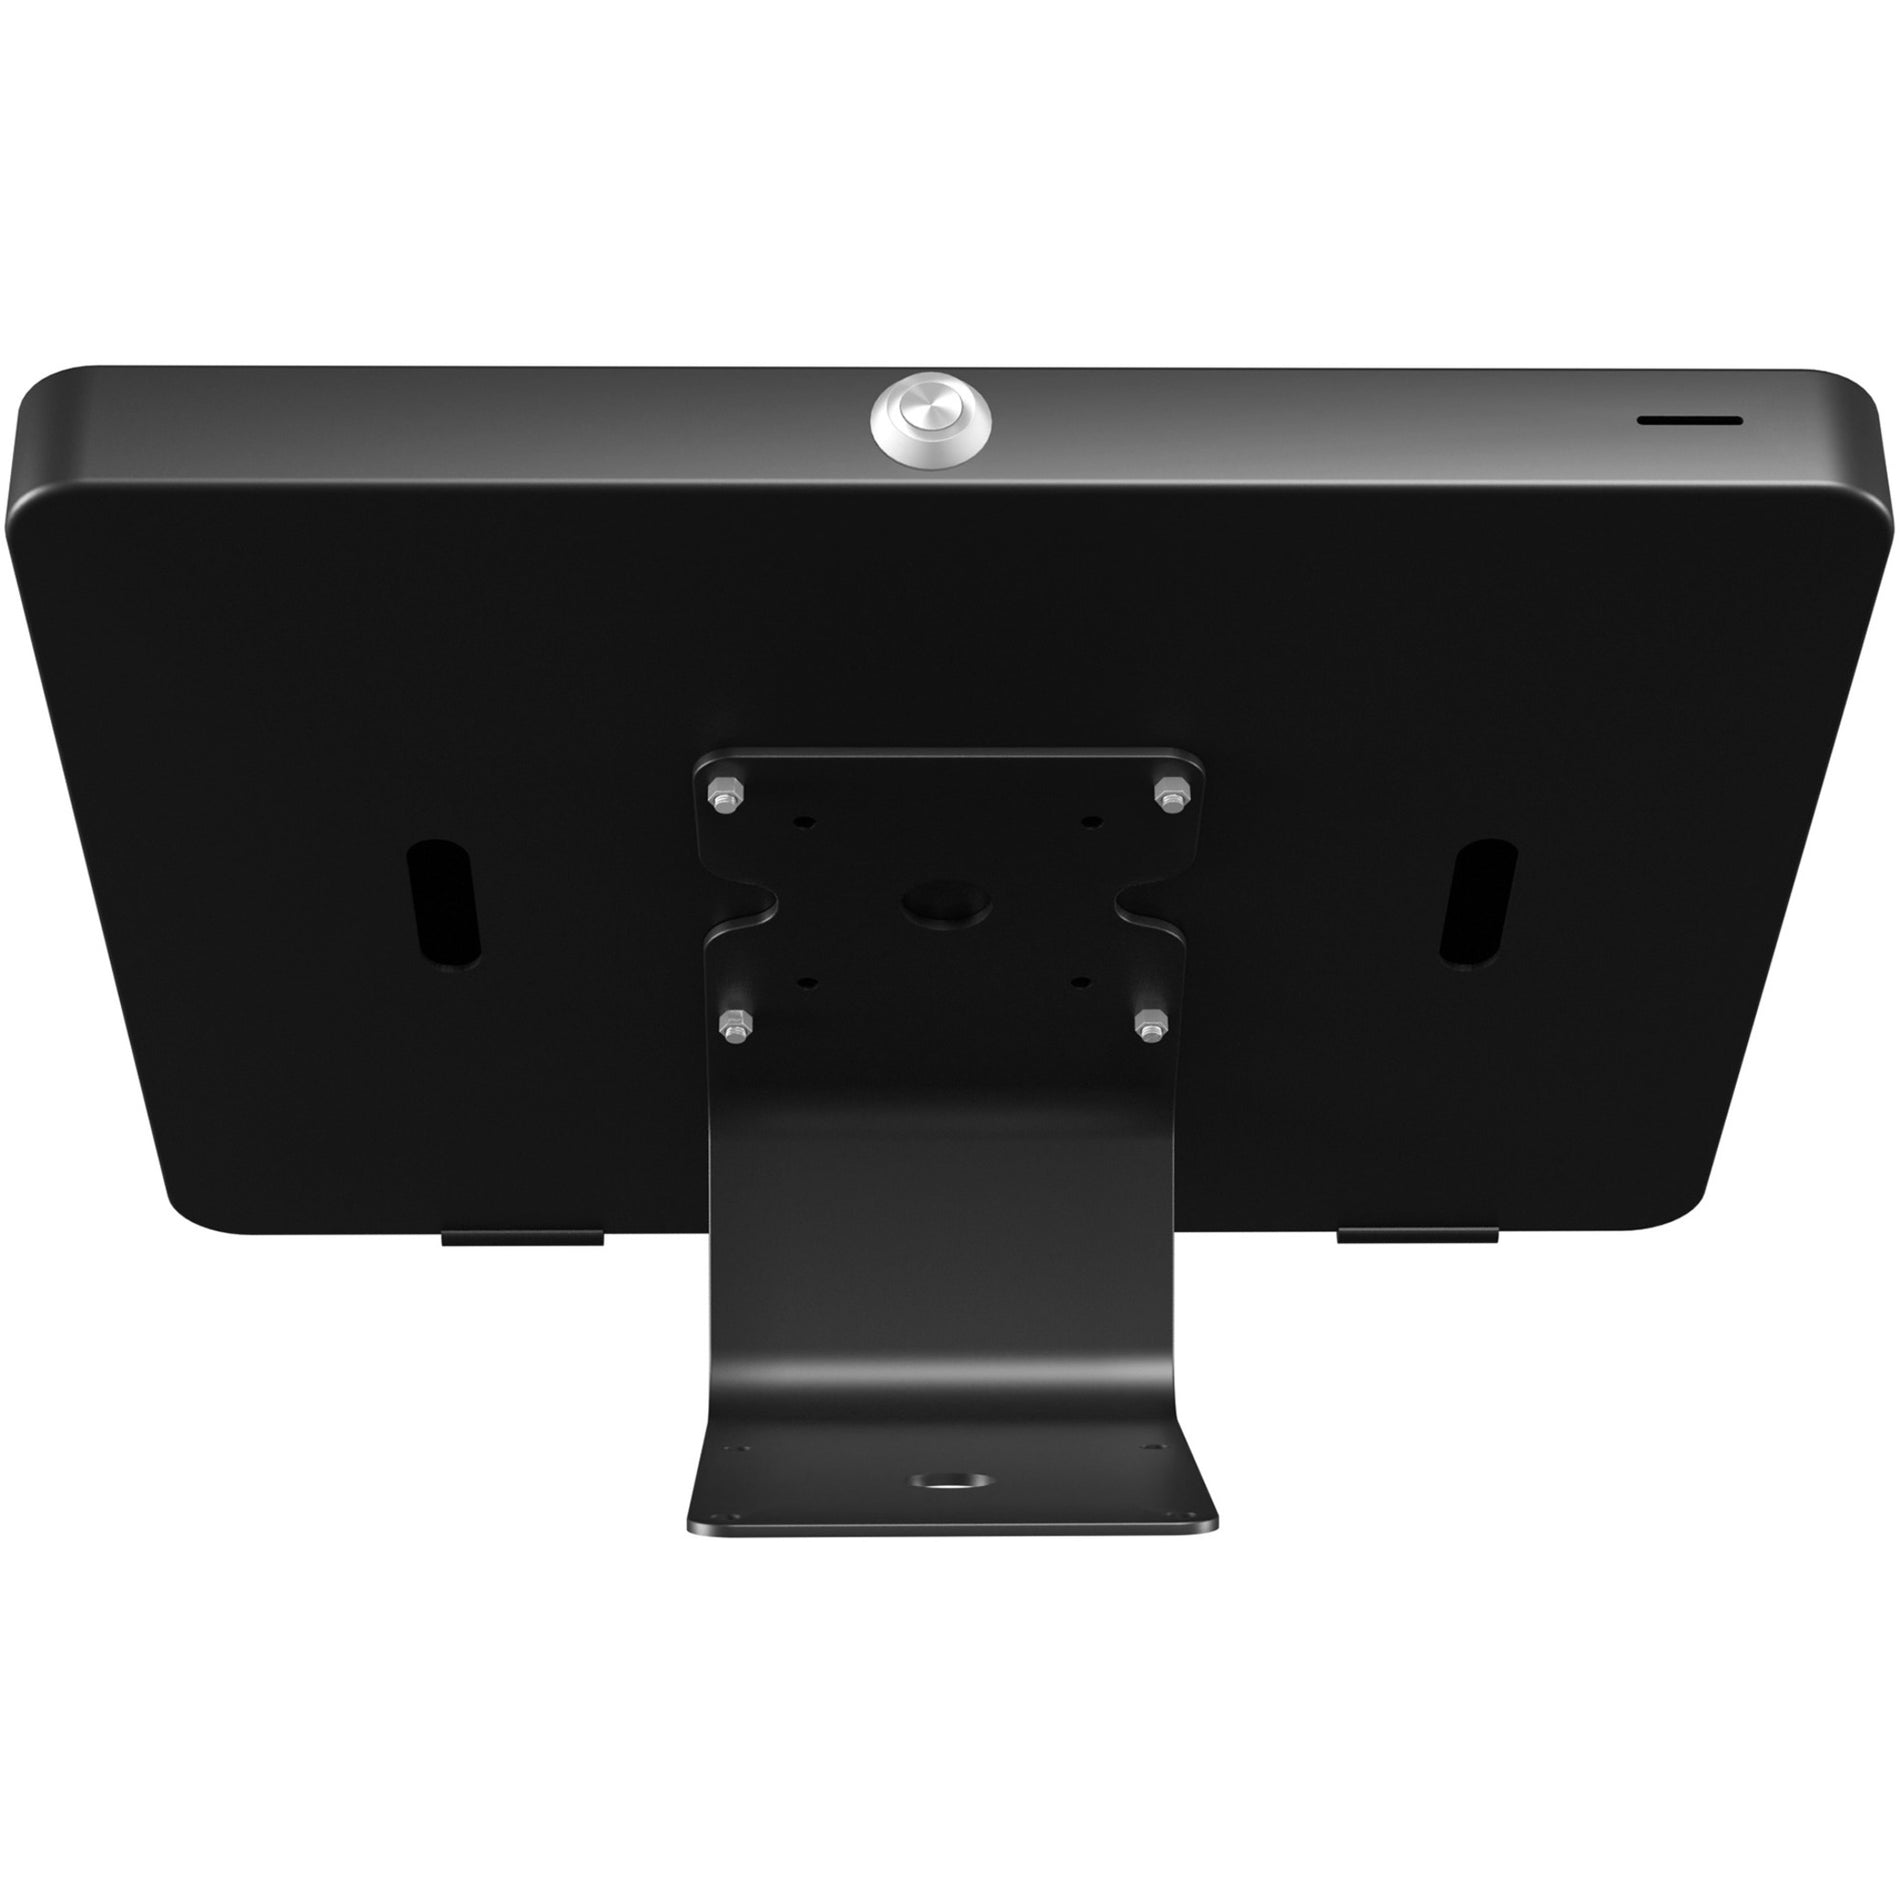 CTA Digital PAD-CURVEB Curved Stand & Wall Mount with Paragon Enclosures Black, Key Lock, Cable Management